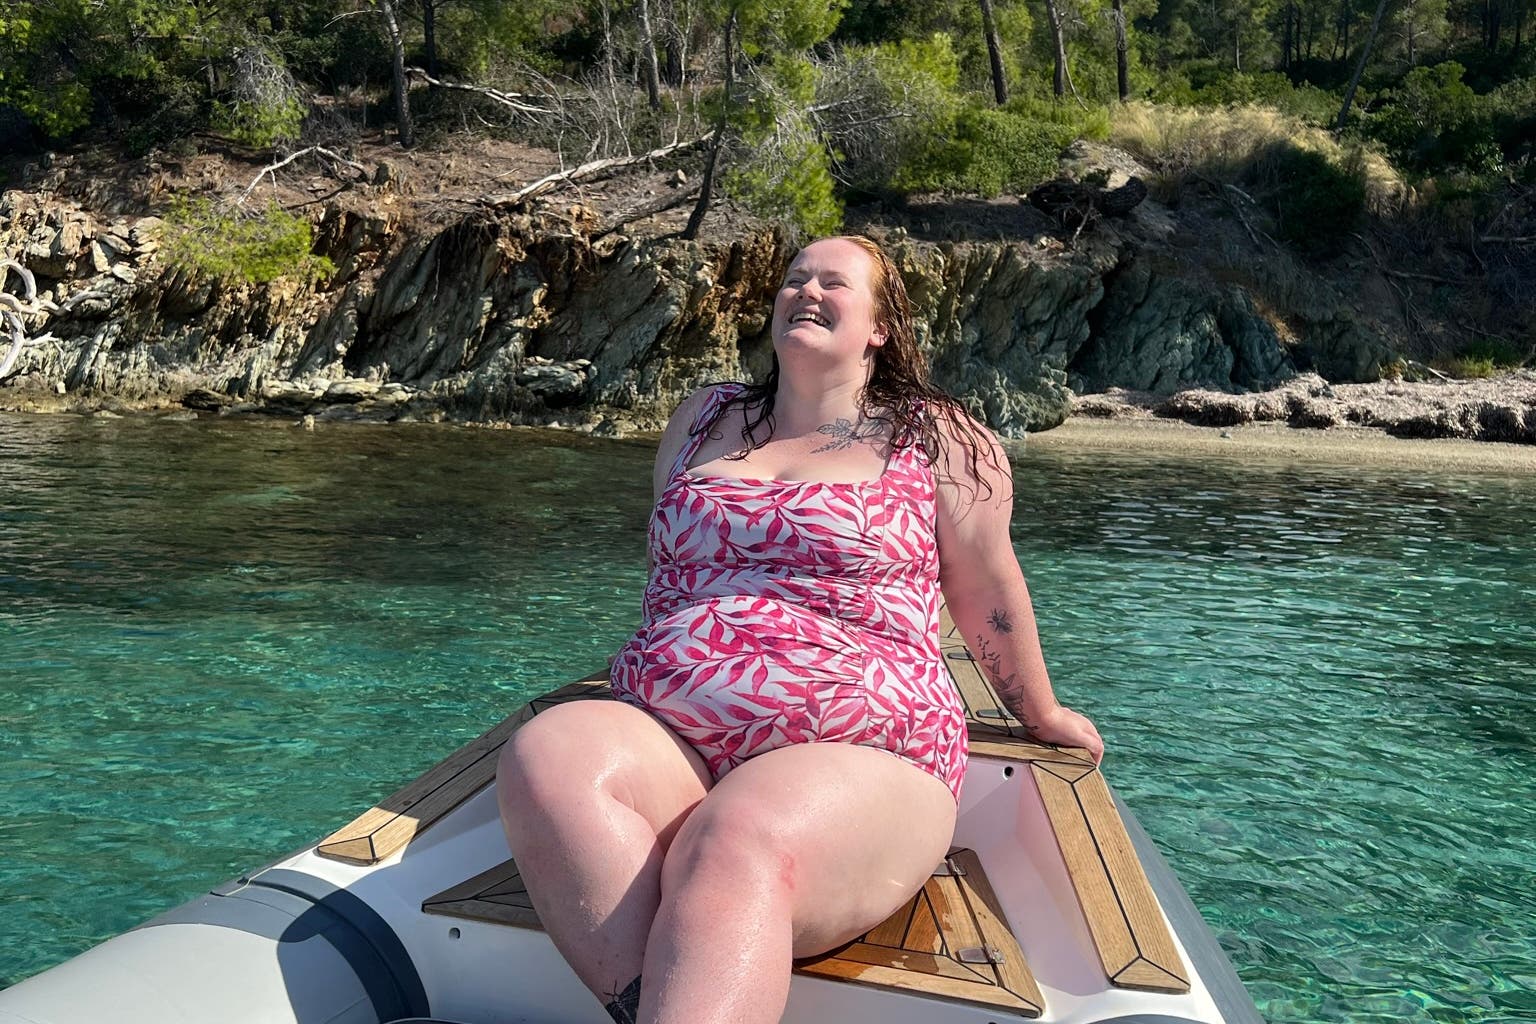 Influencer who once thought she was 'too fat to travel' now plans